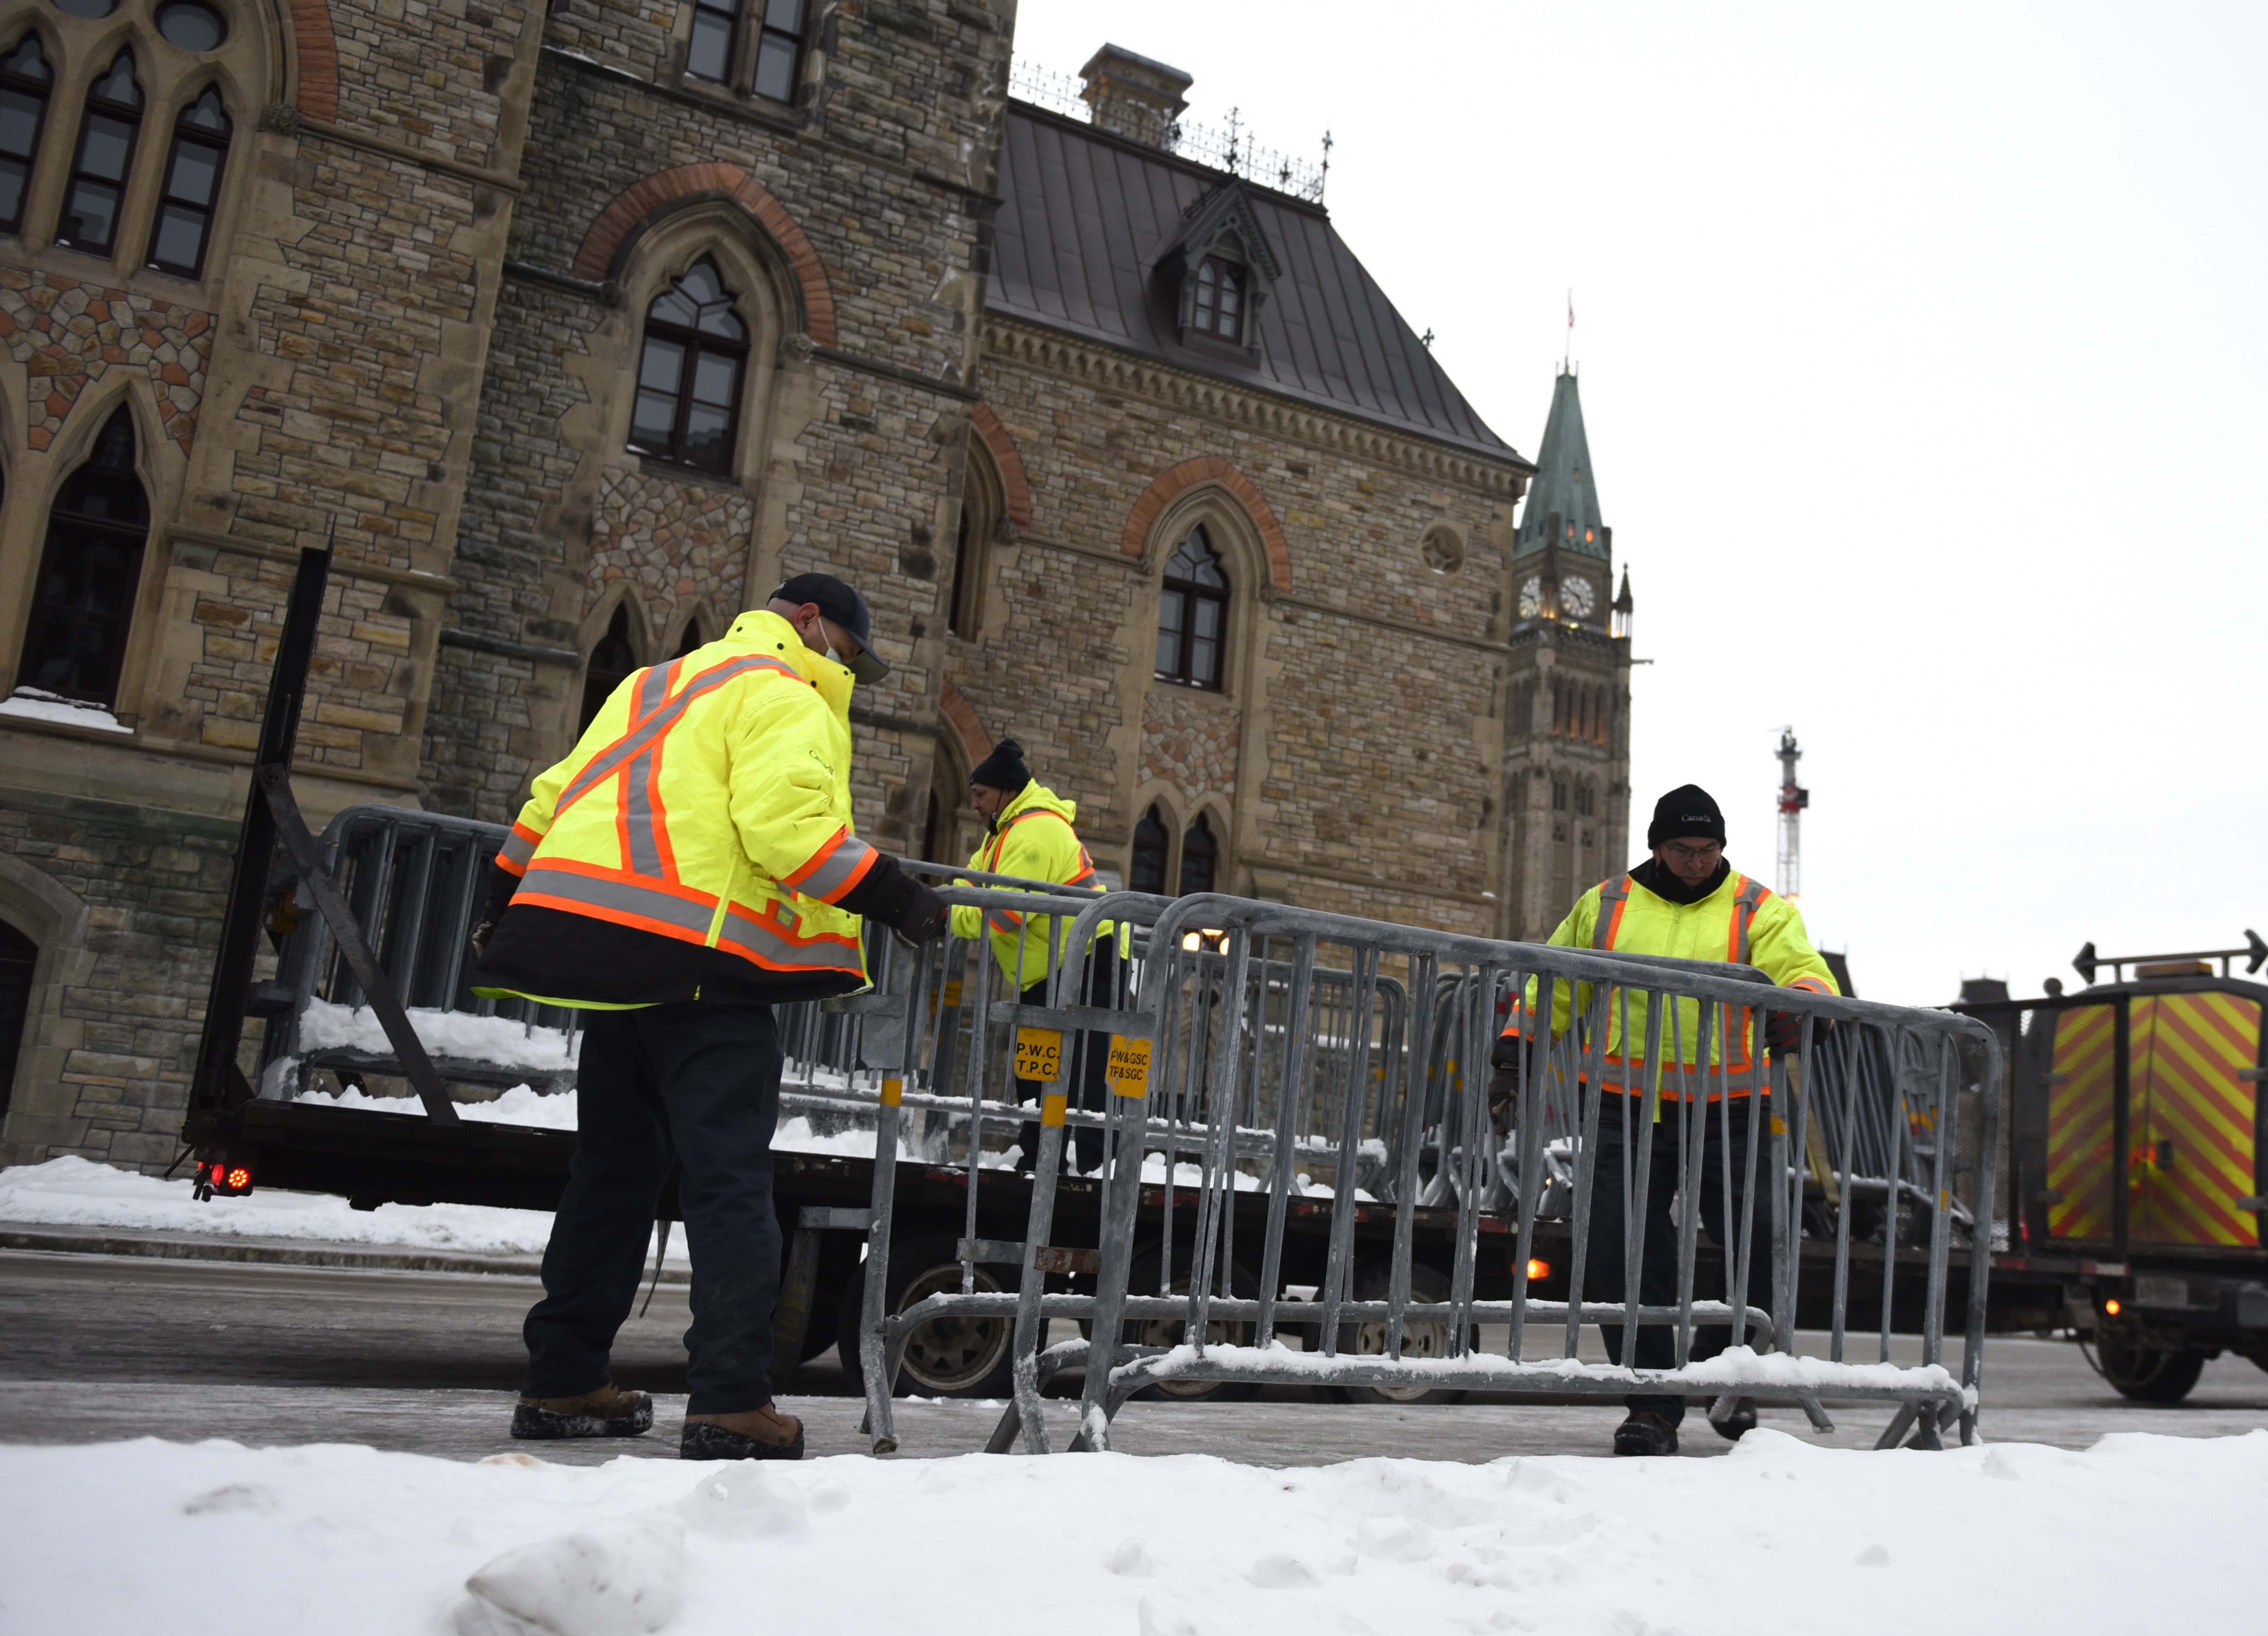 Workers set up barricades in front of Parliament. Photo by the Canadian Press